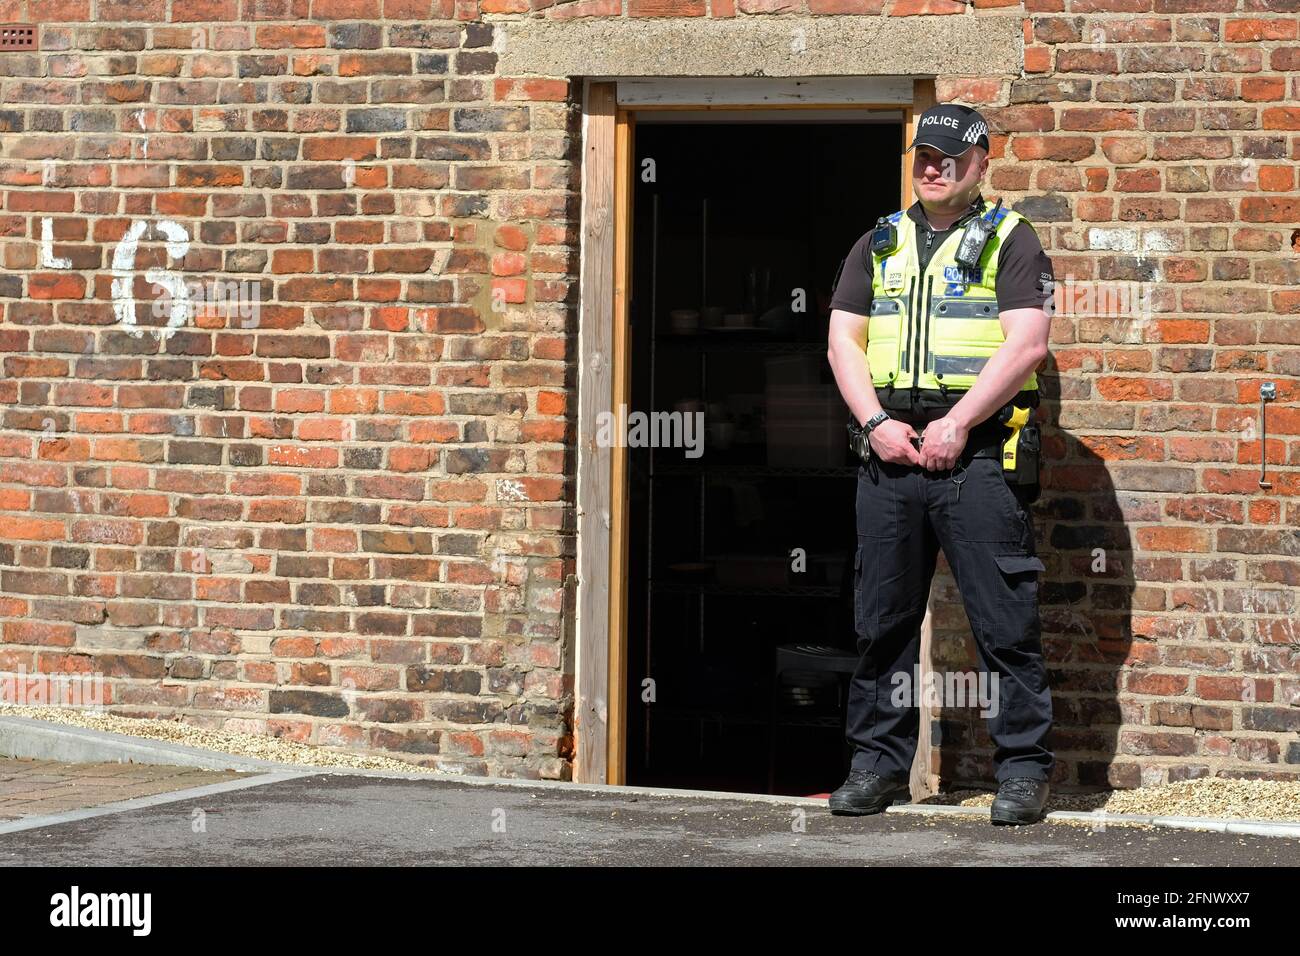 Gloucester, Gloucestershire, UK - Wednesday 19th May 2021 - Police officer stands guard at the rear of the Clean Plate cafe as Police begin excavations in the search for Mary Bastholm who went missing in 1968 aged just 15 years old and who may have been a victim of serial killer Fred West. Photo Steven May / Alamy Live News Stock Photo